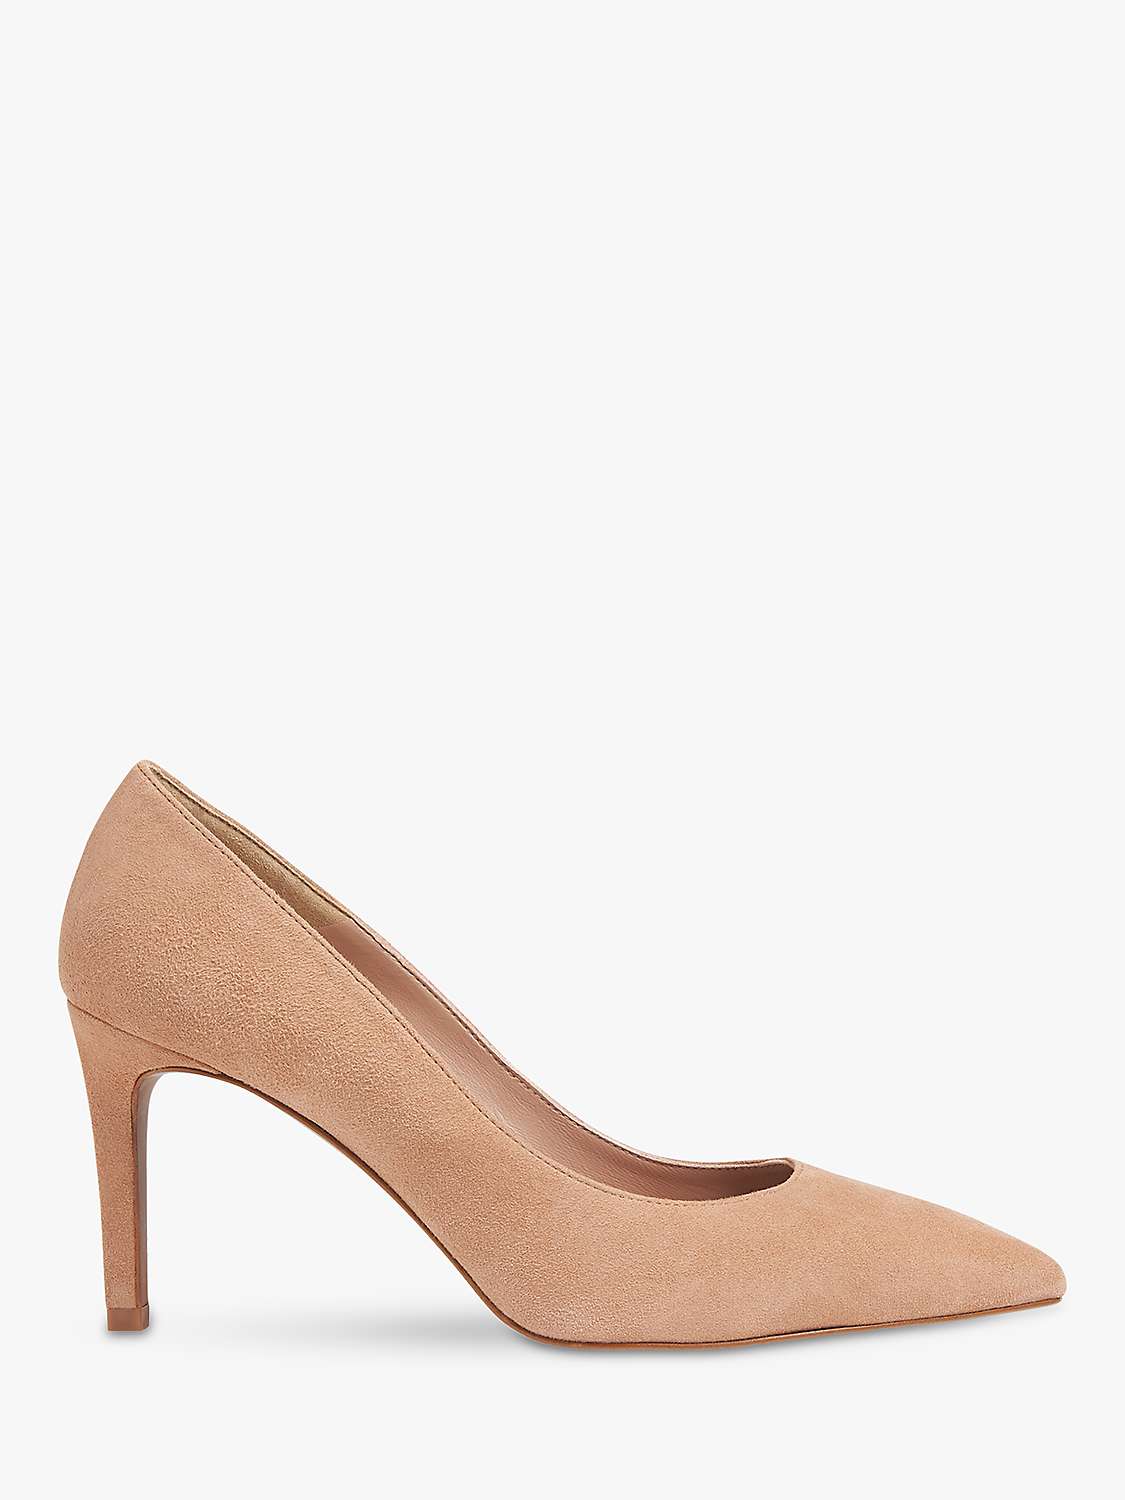 Buy Whistles Cari Suede Stiletto Heel Court Shoes, Nude Online at johnlewis.com